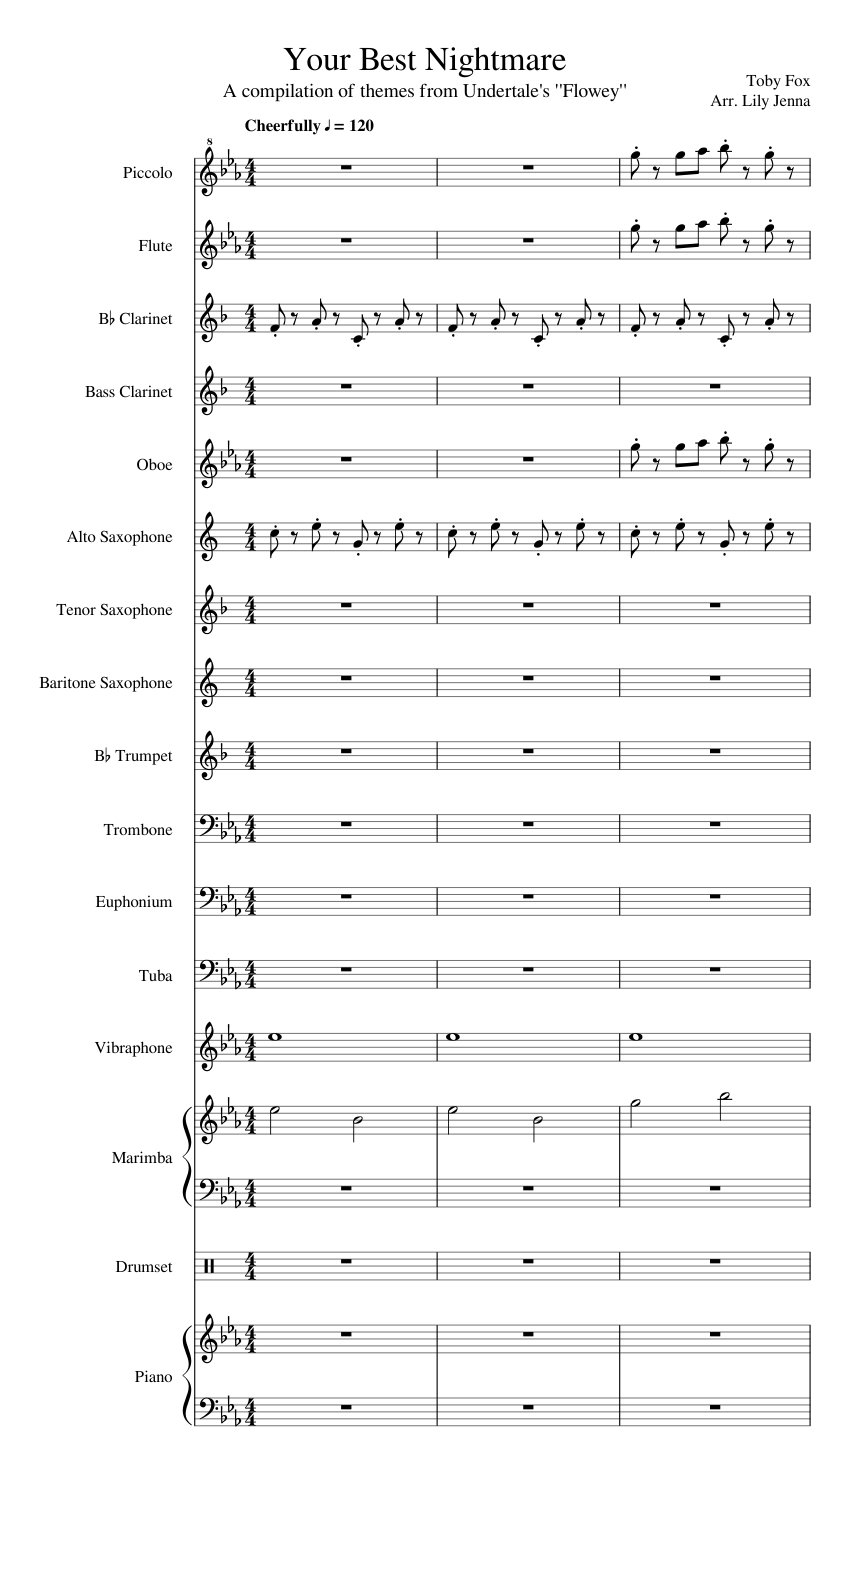 Your Best Nightmare - Omega Flowey Sheet music for Piano (Solo)